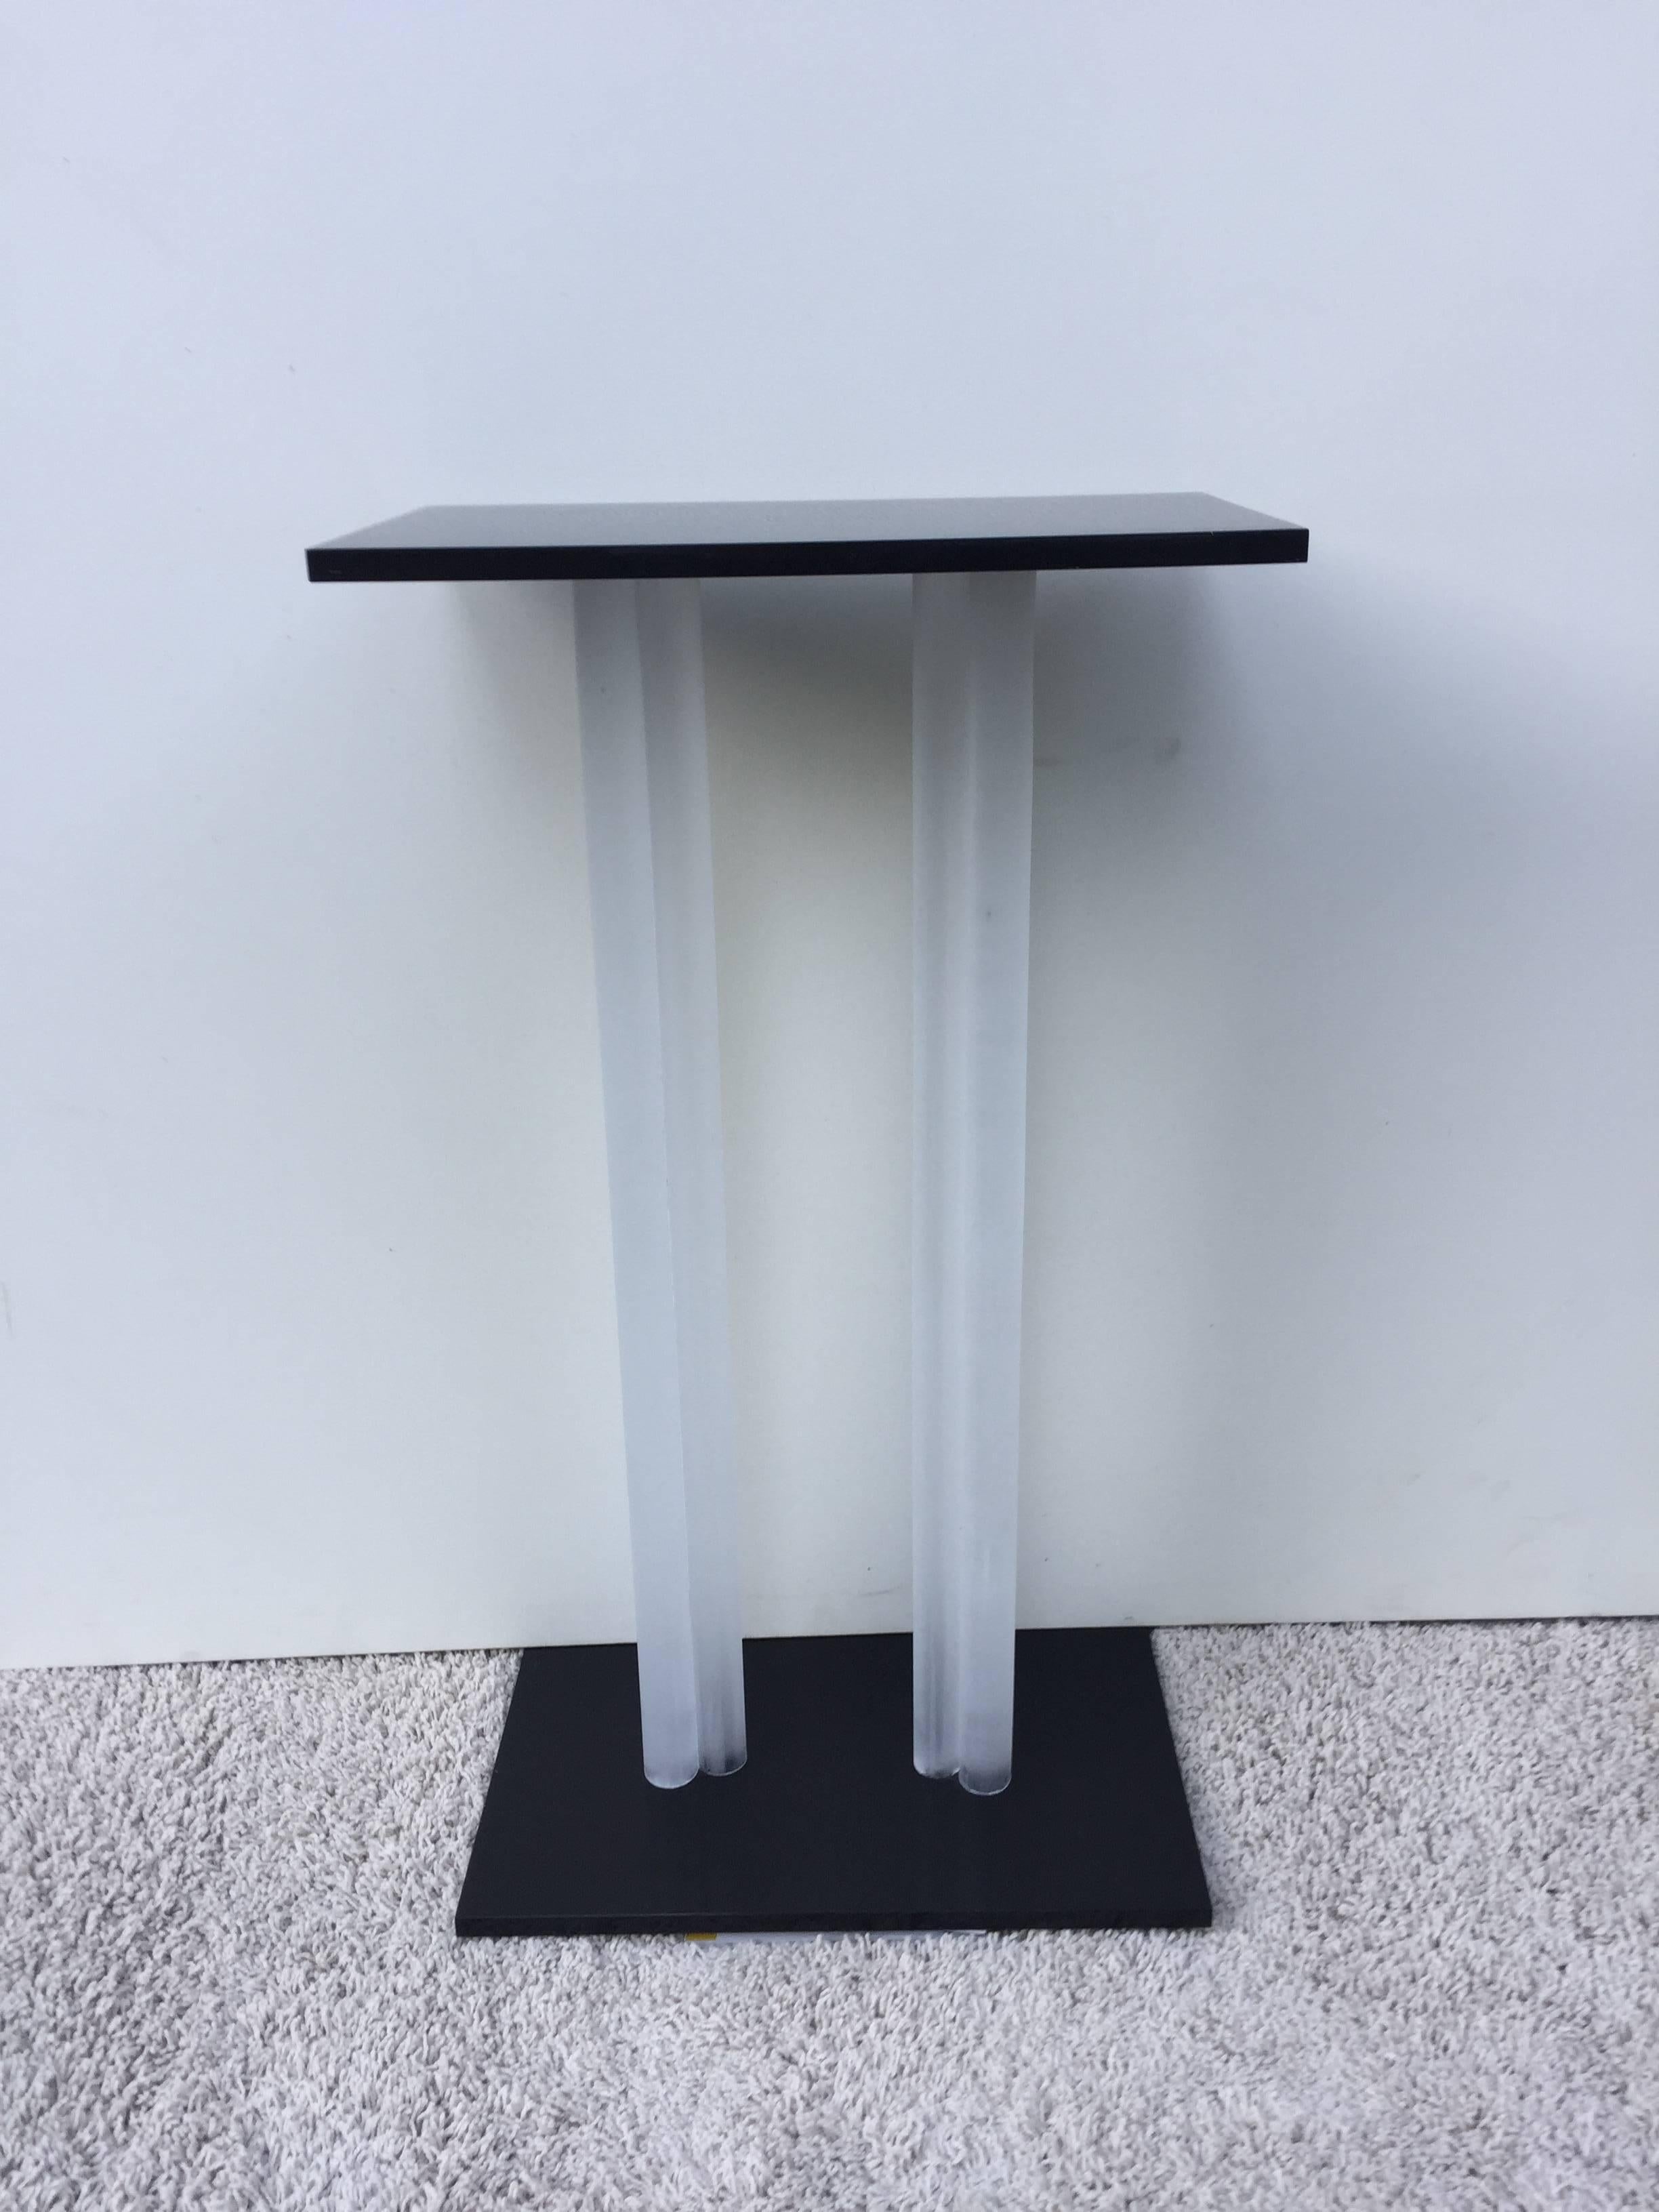 Charles Hollis Jone style pedestal base double column black and frosted clear Lucite, custom made one of a kind.